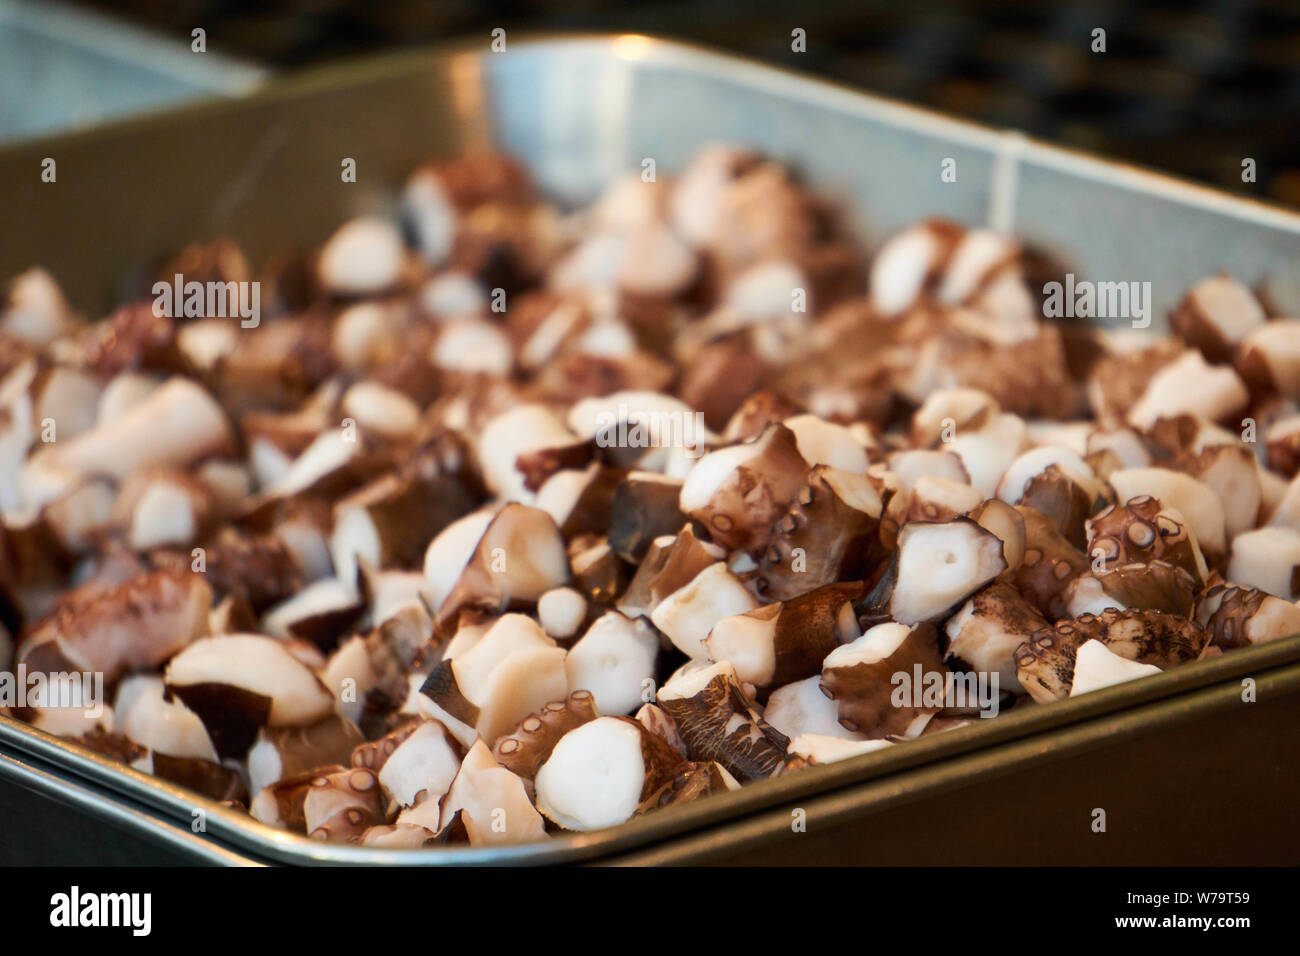 Chopped octopus pieces are kept in a metal tray before being cooked in takoyaki (octopus balls) at a festival in Japan. Stock Photo